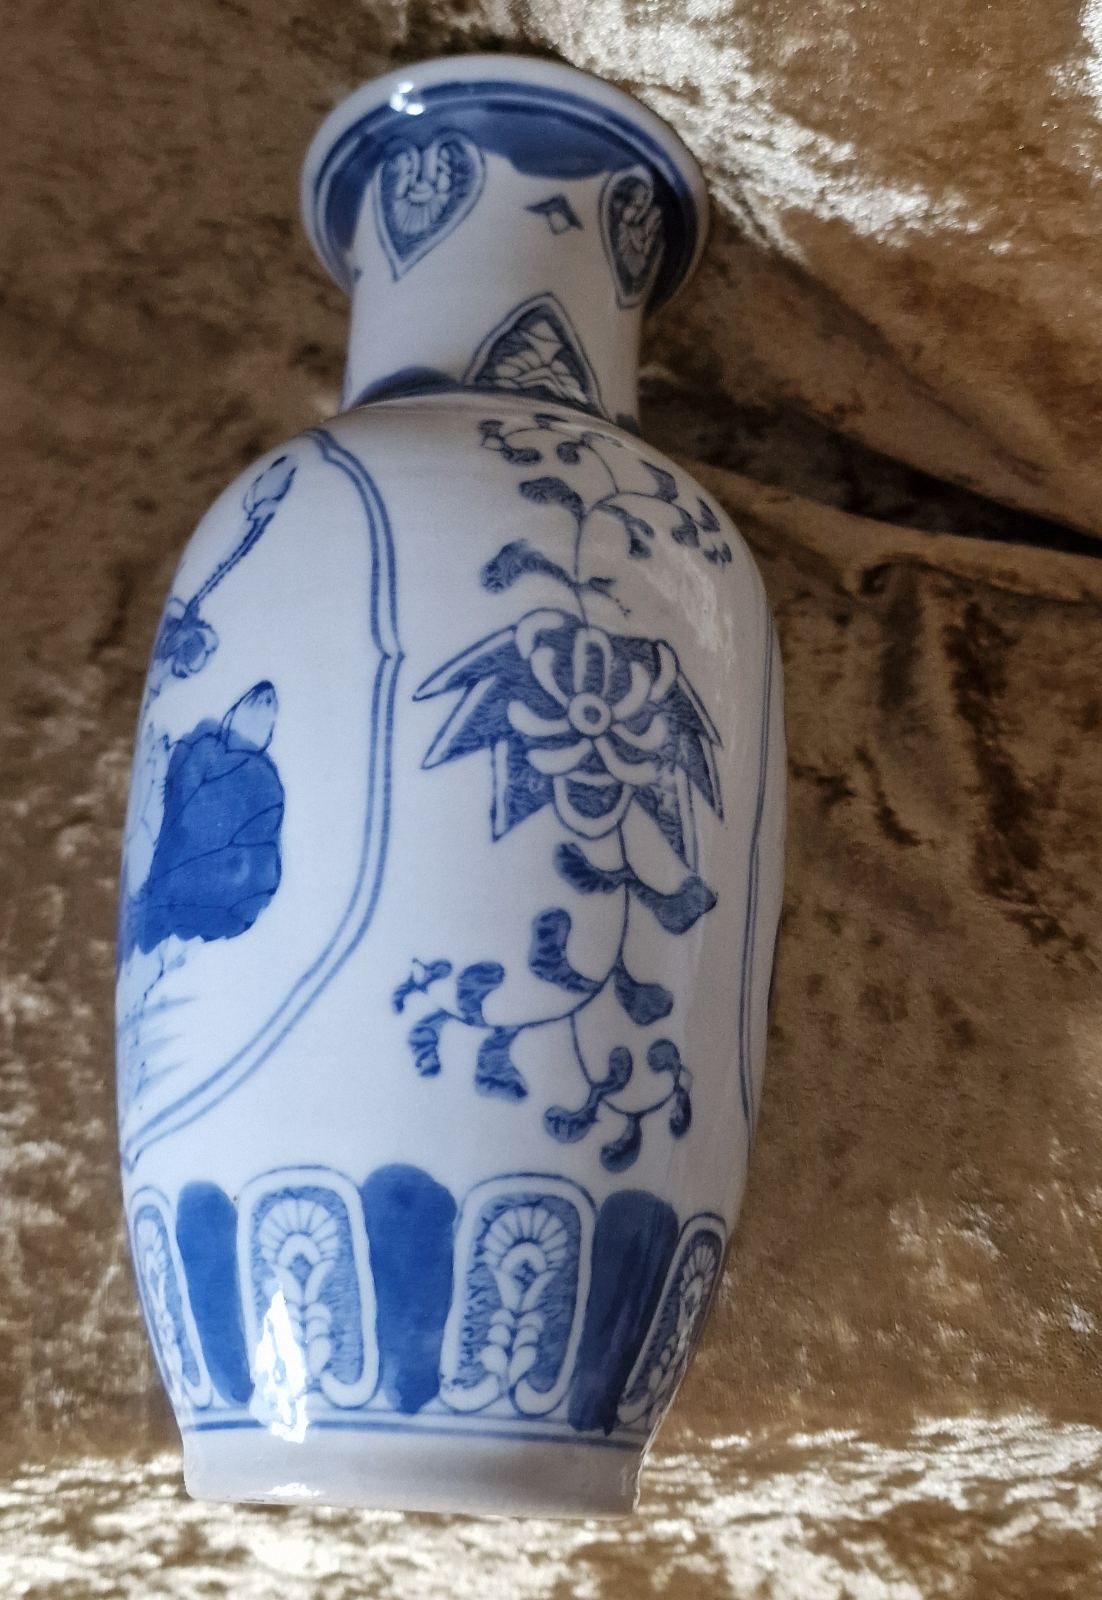 Blue and white vase with bird design, perfect for adding a touch of elegance to any room decor.